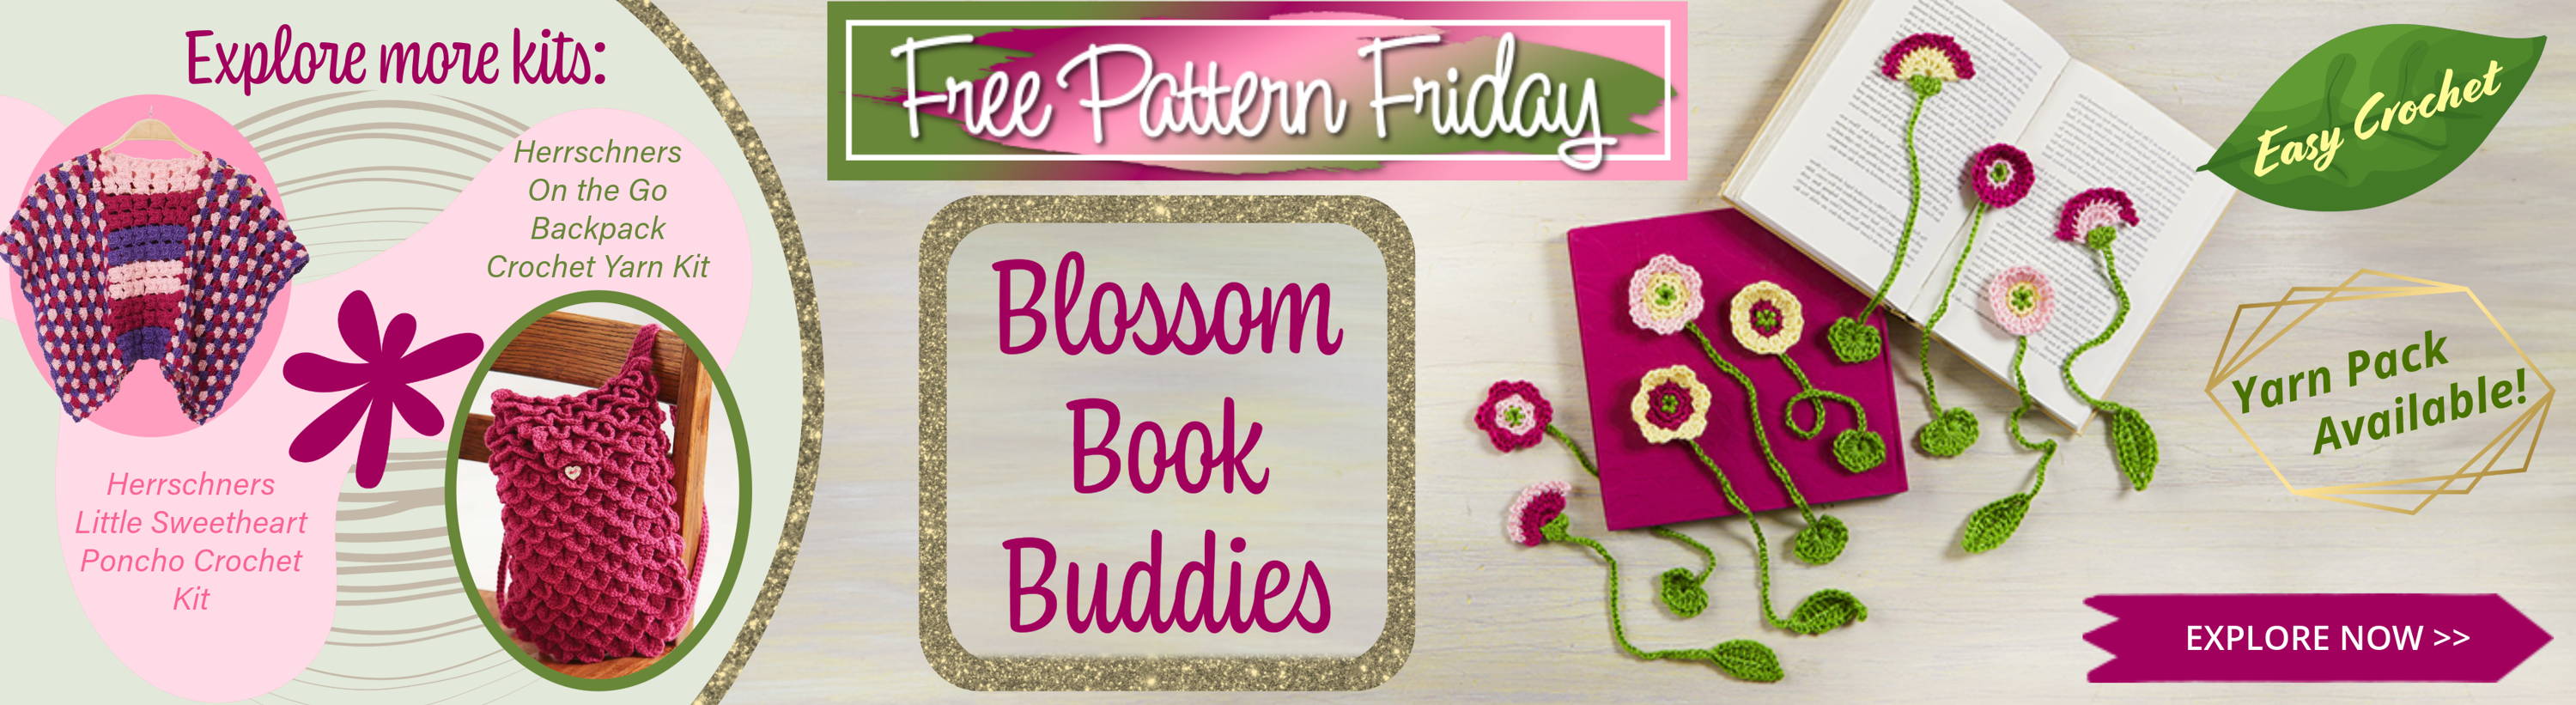 Free Pattern Friday! Blossom Book Buddies. (Easy Crochet.) Yarn Pack and other kits available.